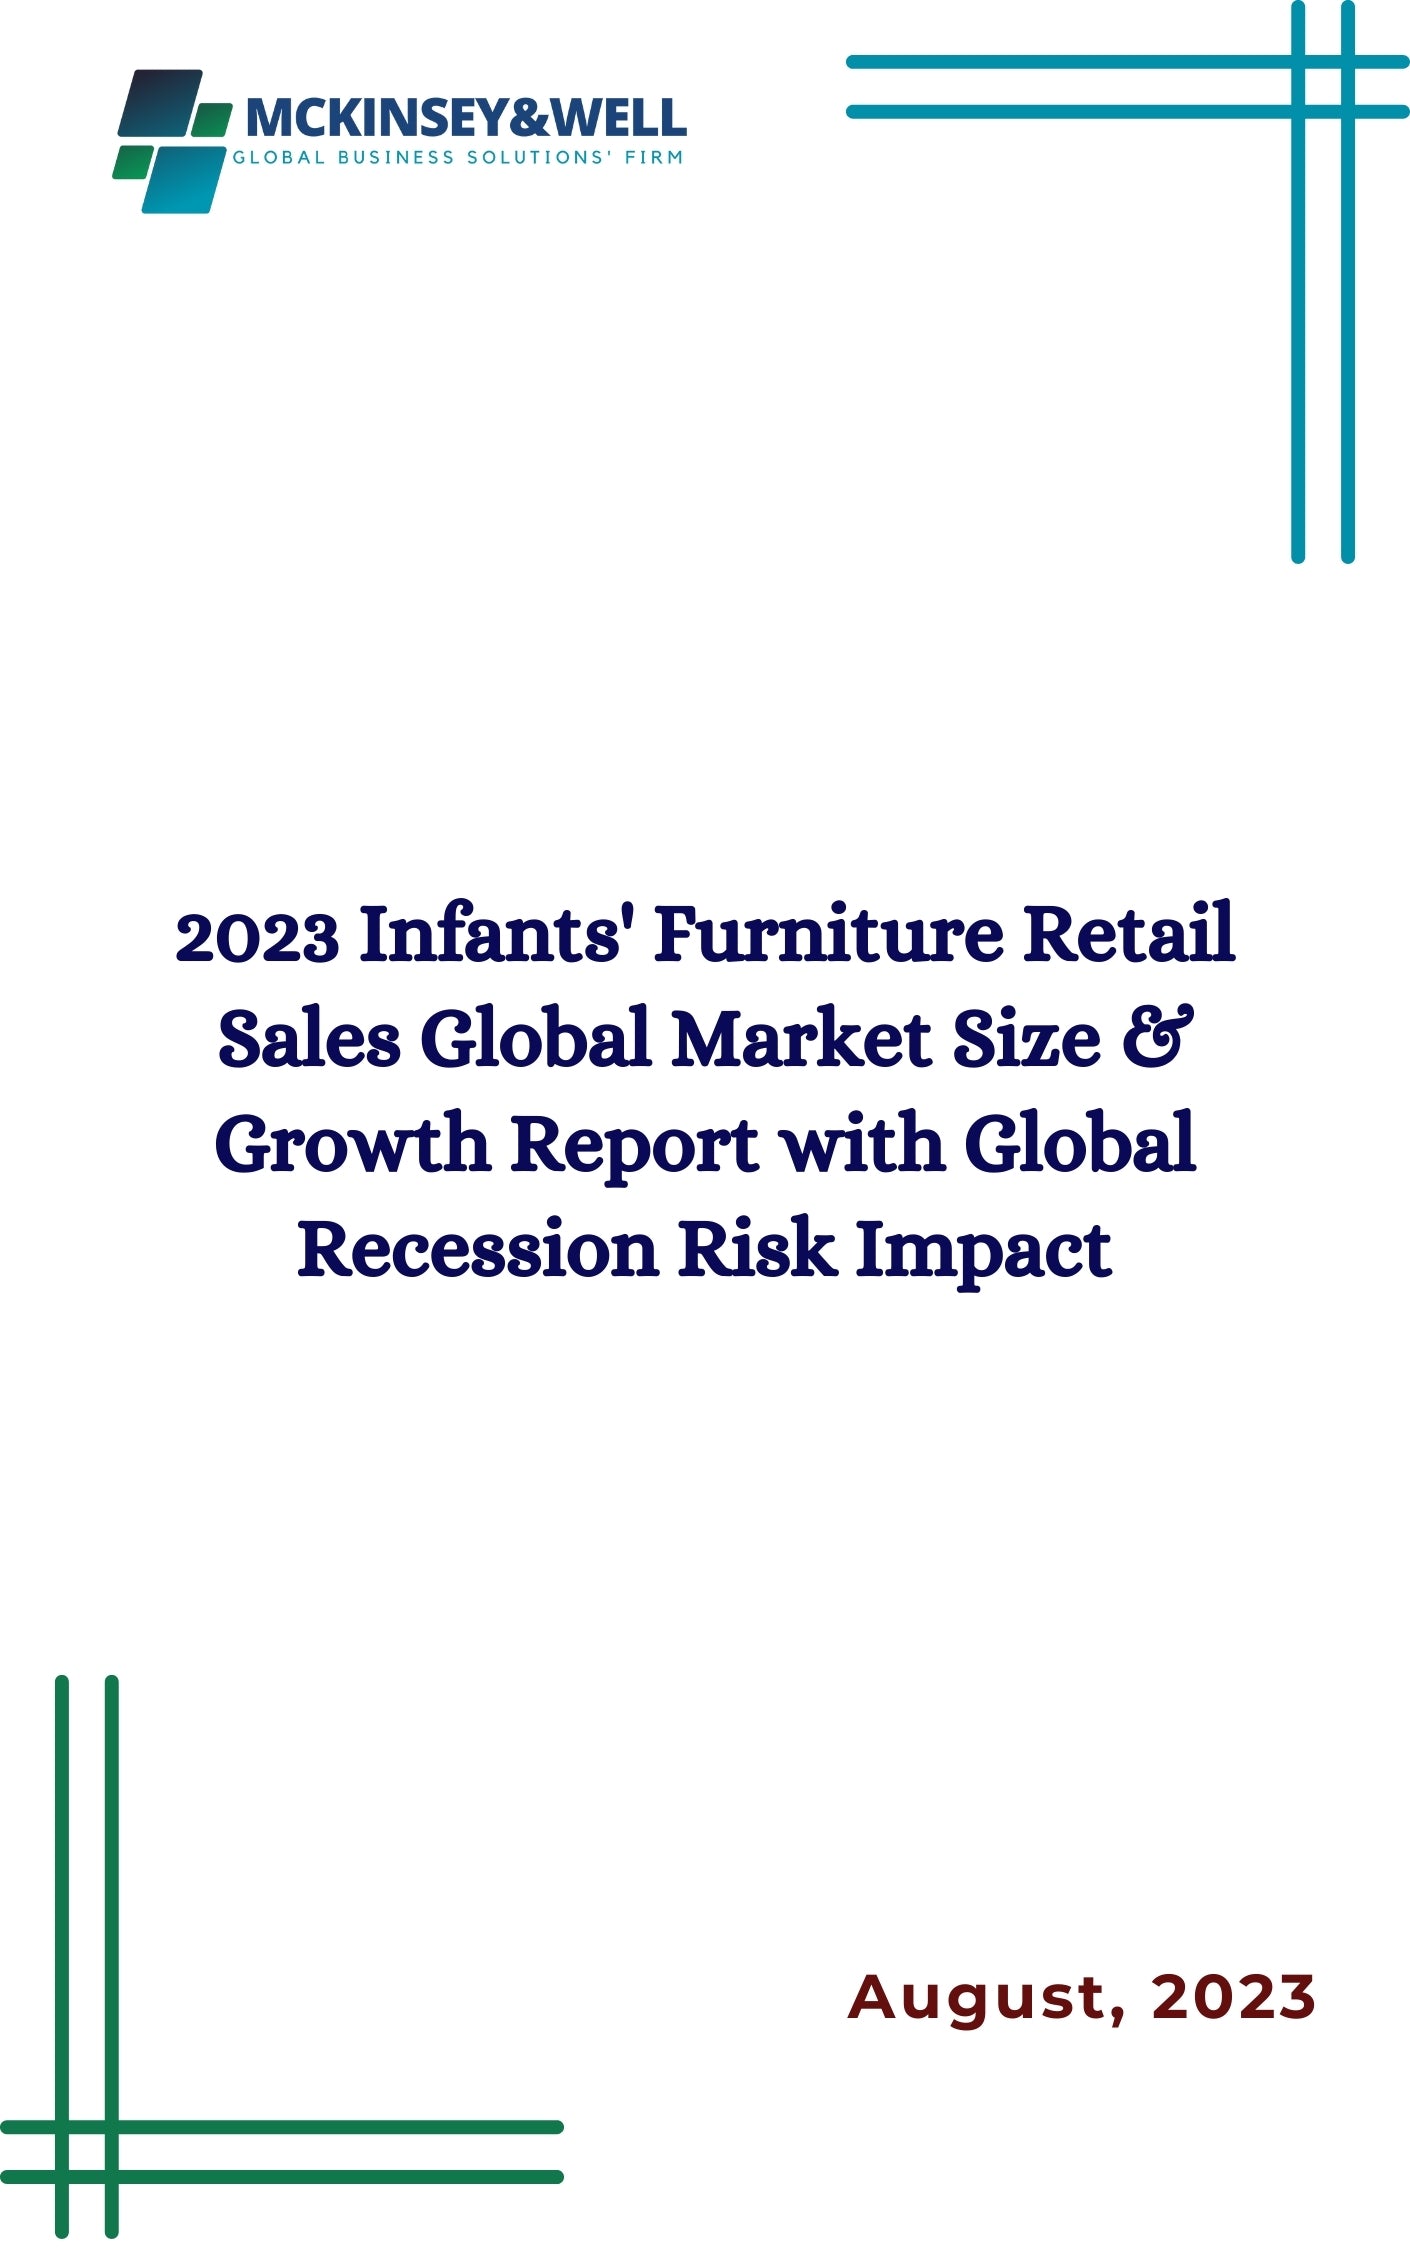 2023 Infants' Furniture Retail Sales Global Market Size & Growth Report with Global Recession Risk Impact